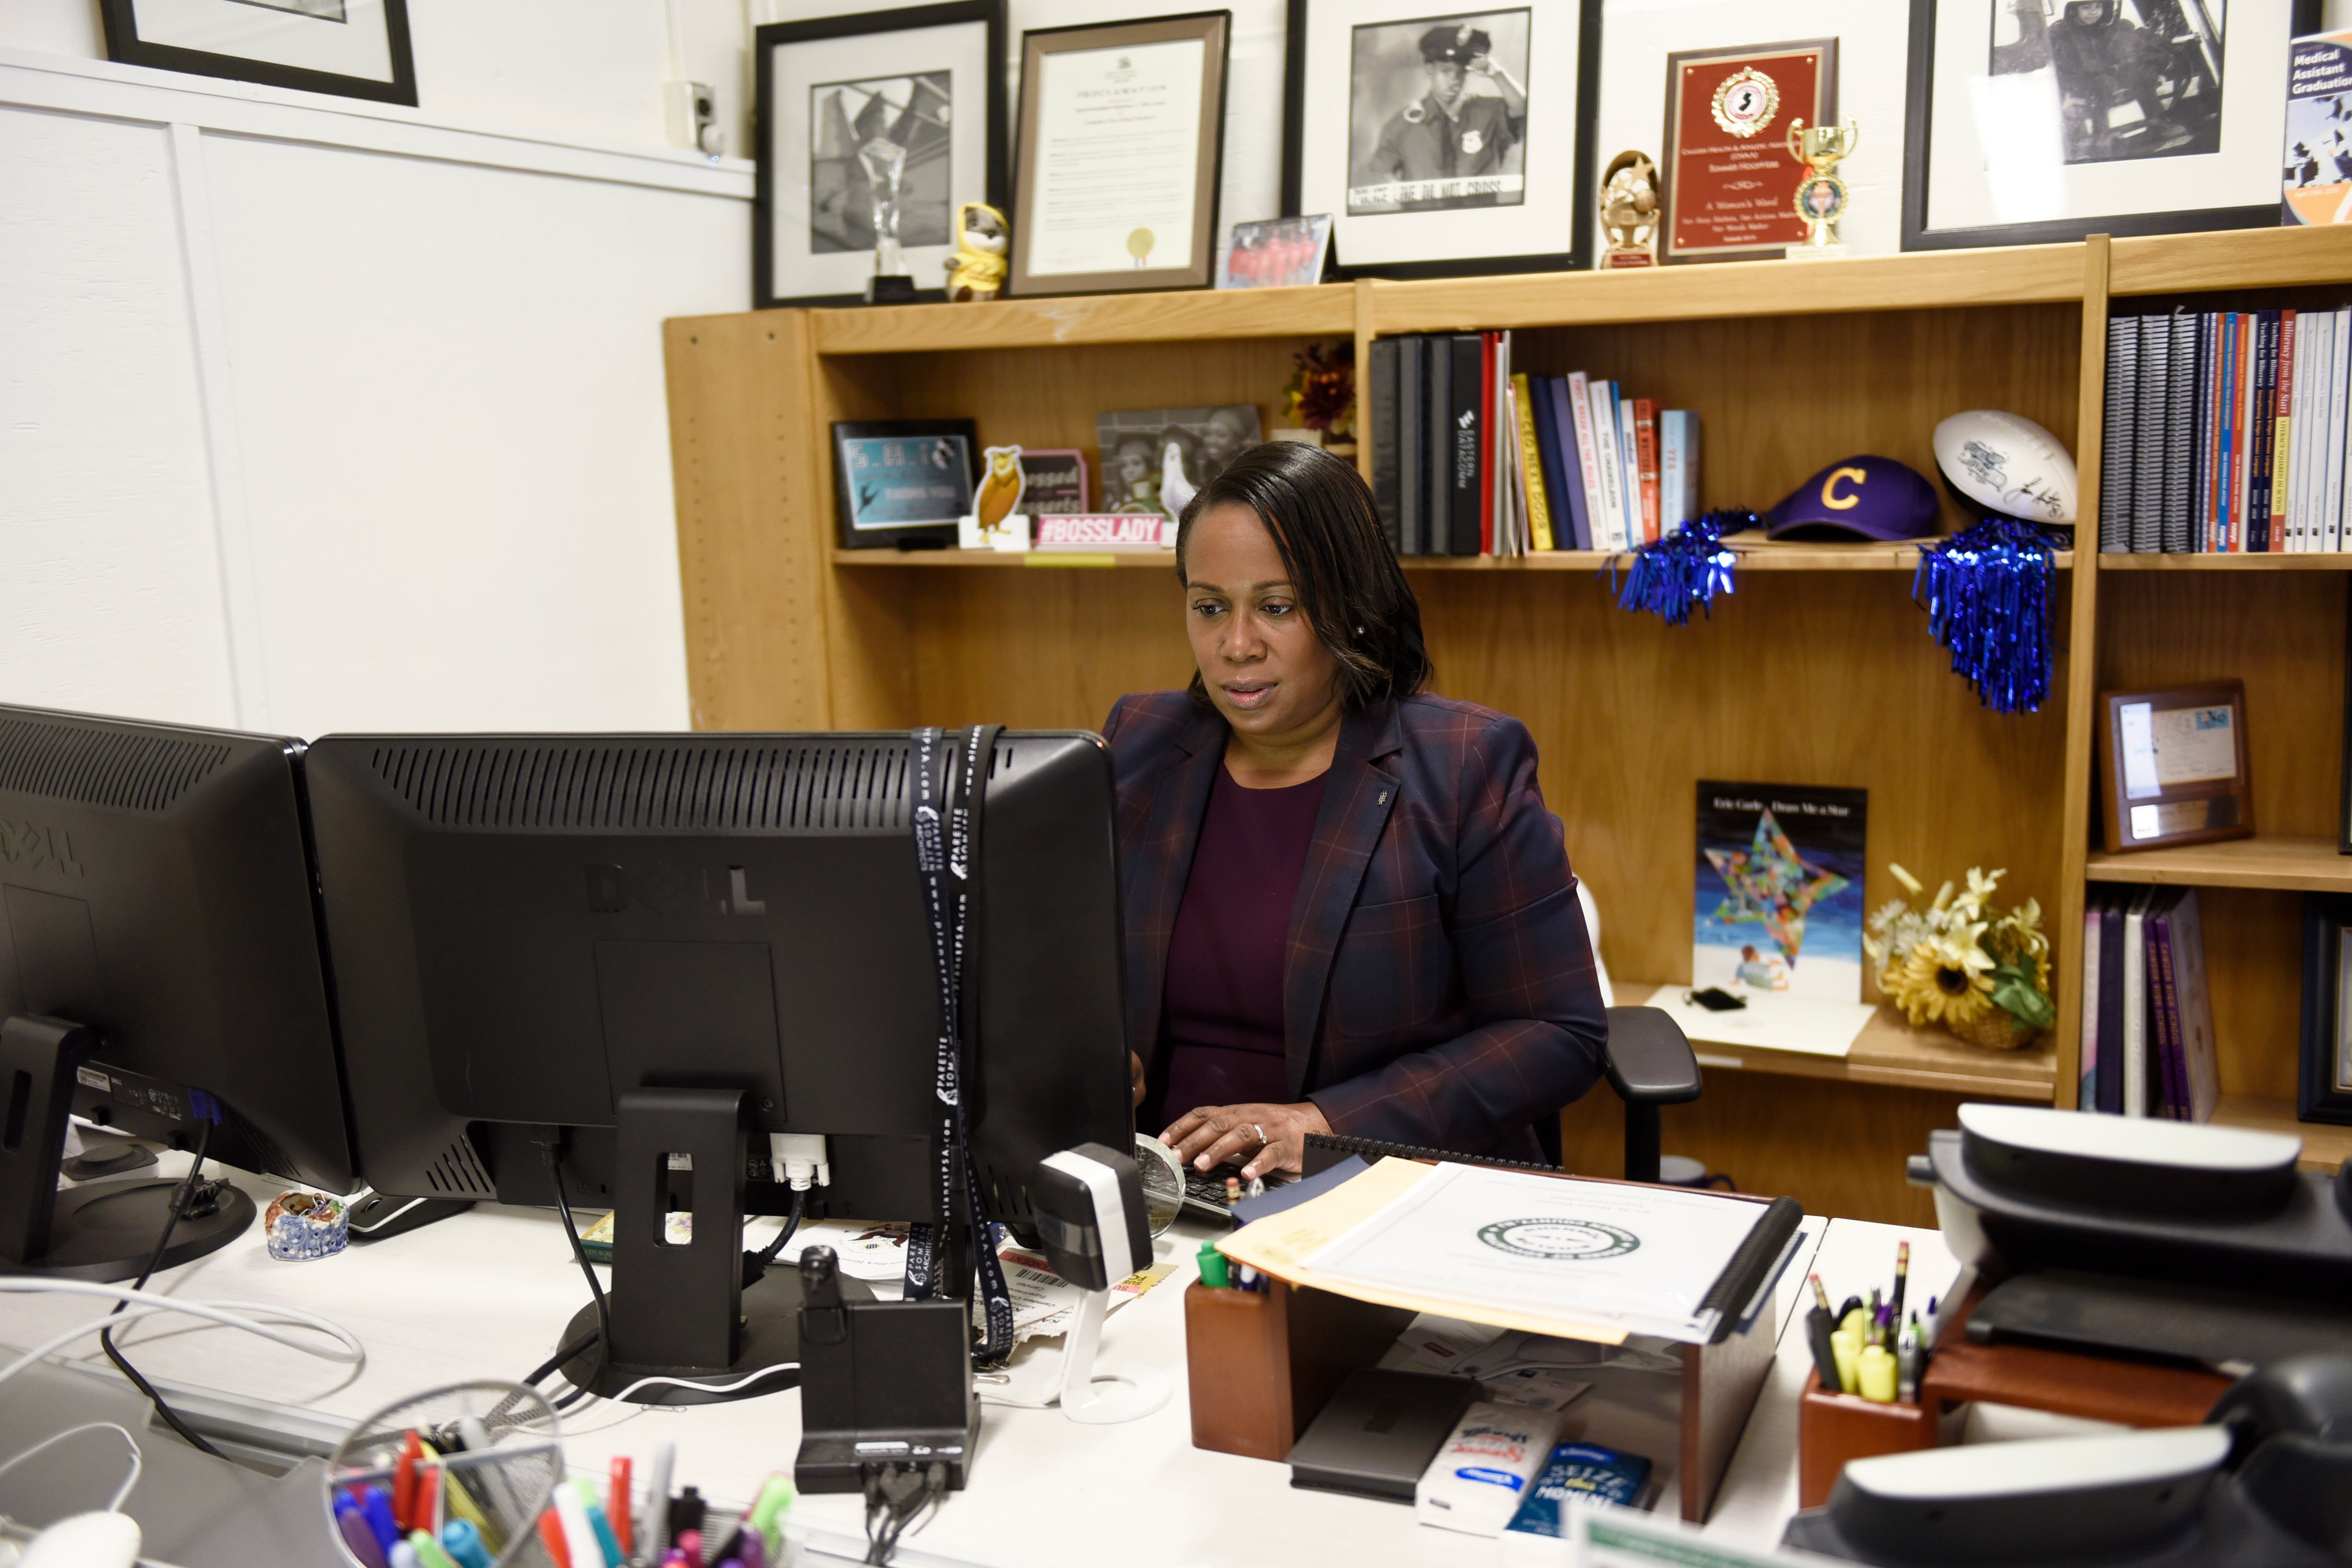 “My gut tells me we are going to take a hit in some of our skills,” said Katrina McCombs, superintendent of the Camden, New Jersey, school district, which is testing students this fall to identify any gaps in student learning caused by the pandemic.